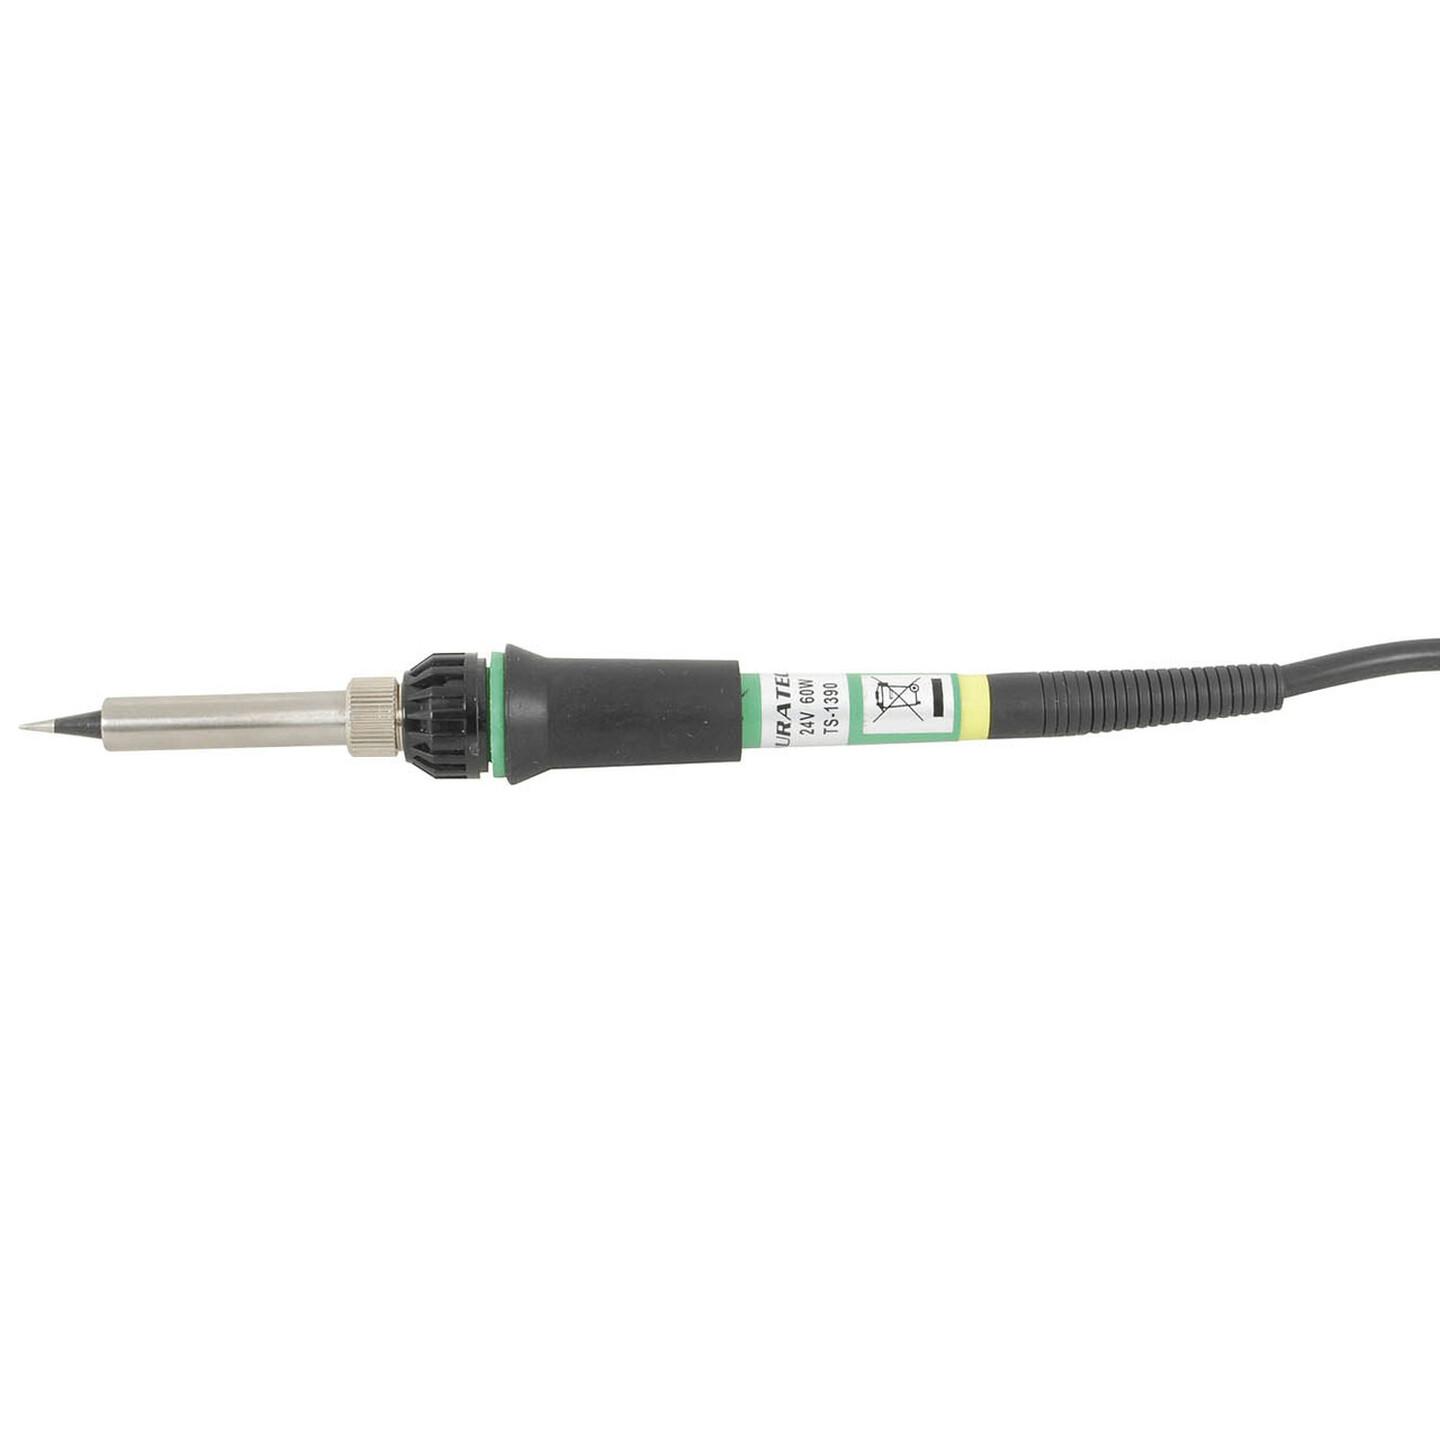 Spare Soldering Iron for TS-1390 4 Pin Connector